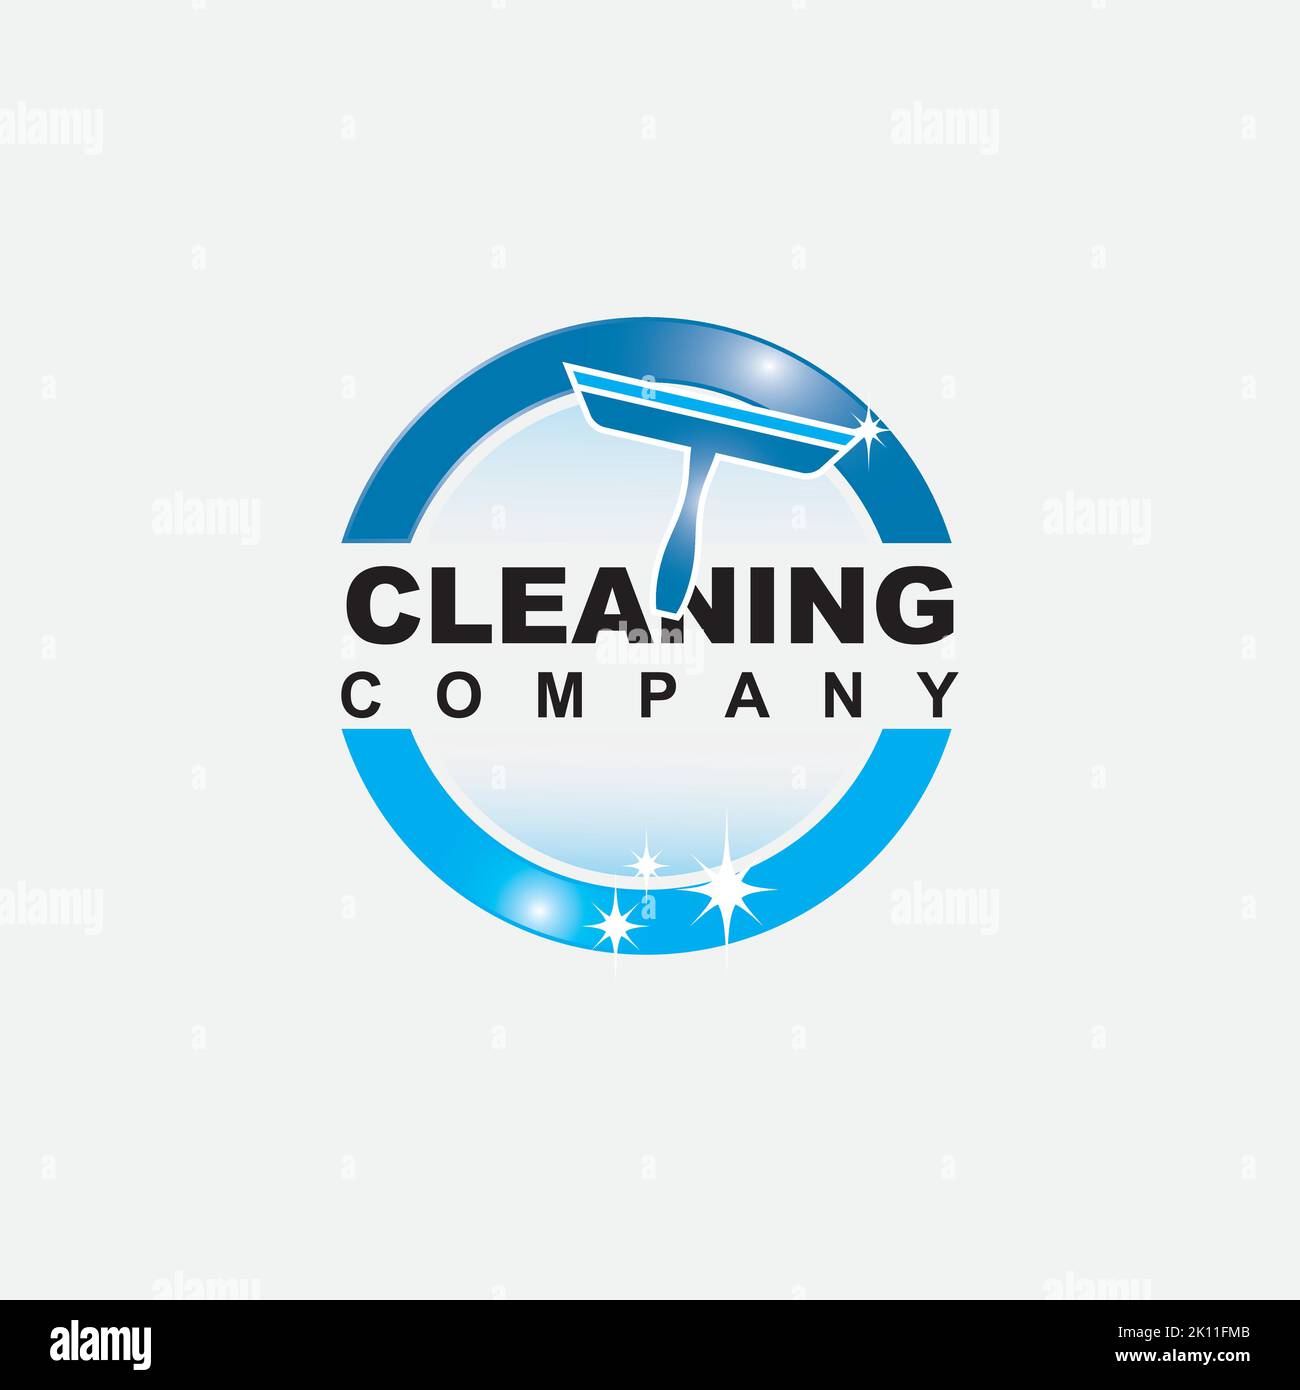 Cleaning service logo design vector template inspiration Stock Vector